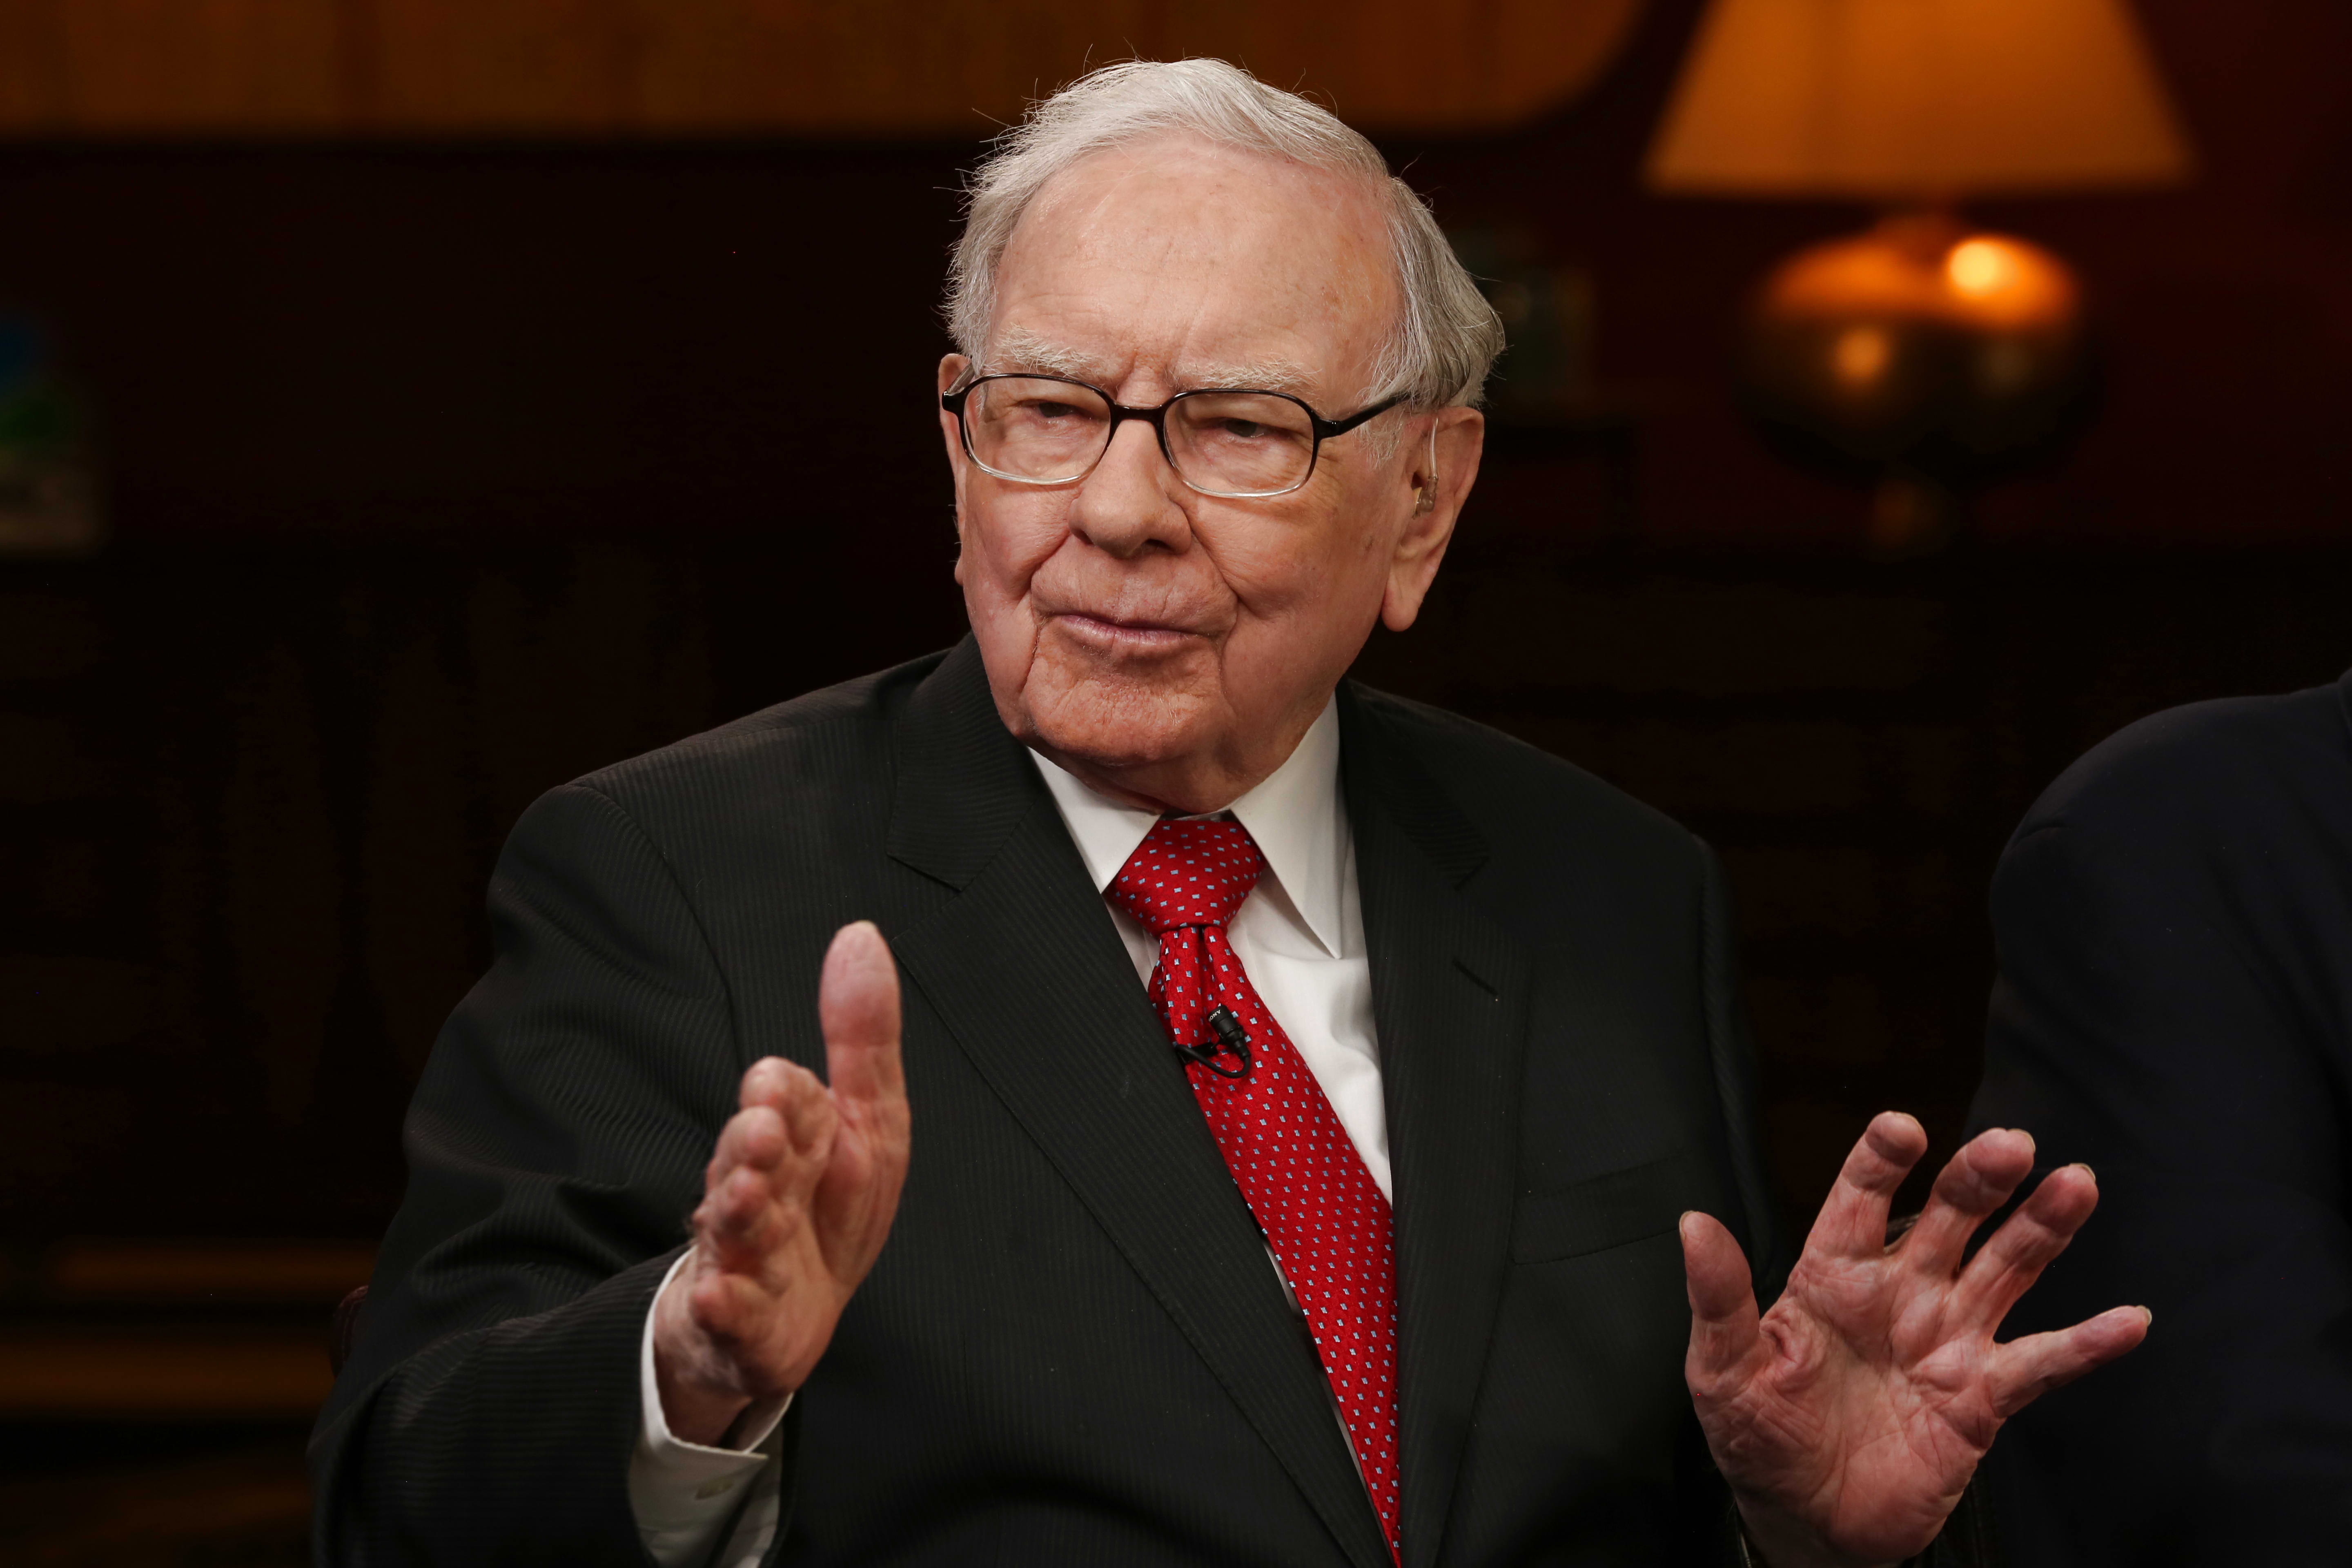 Warren Buffett says ‘never bet against America’ in a letter touting Berkshire assets based in the United States